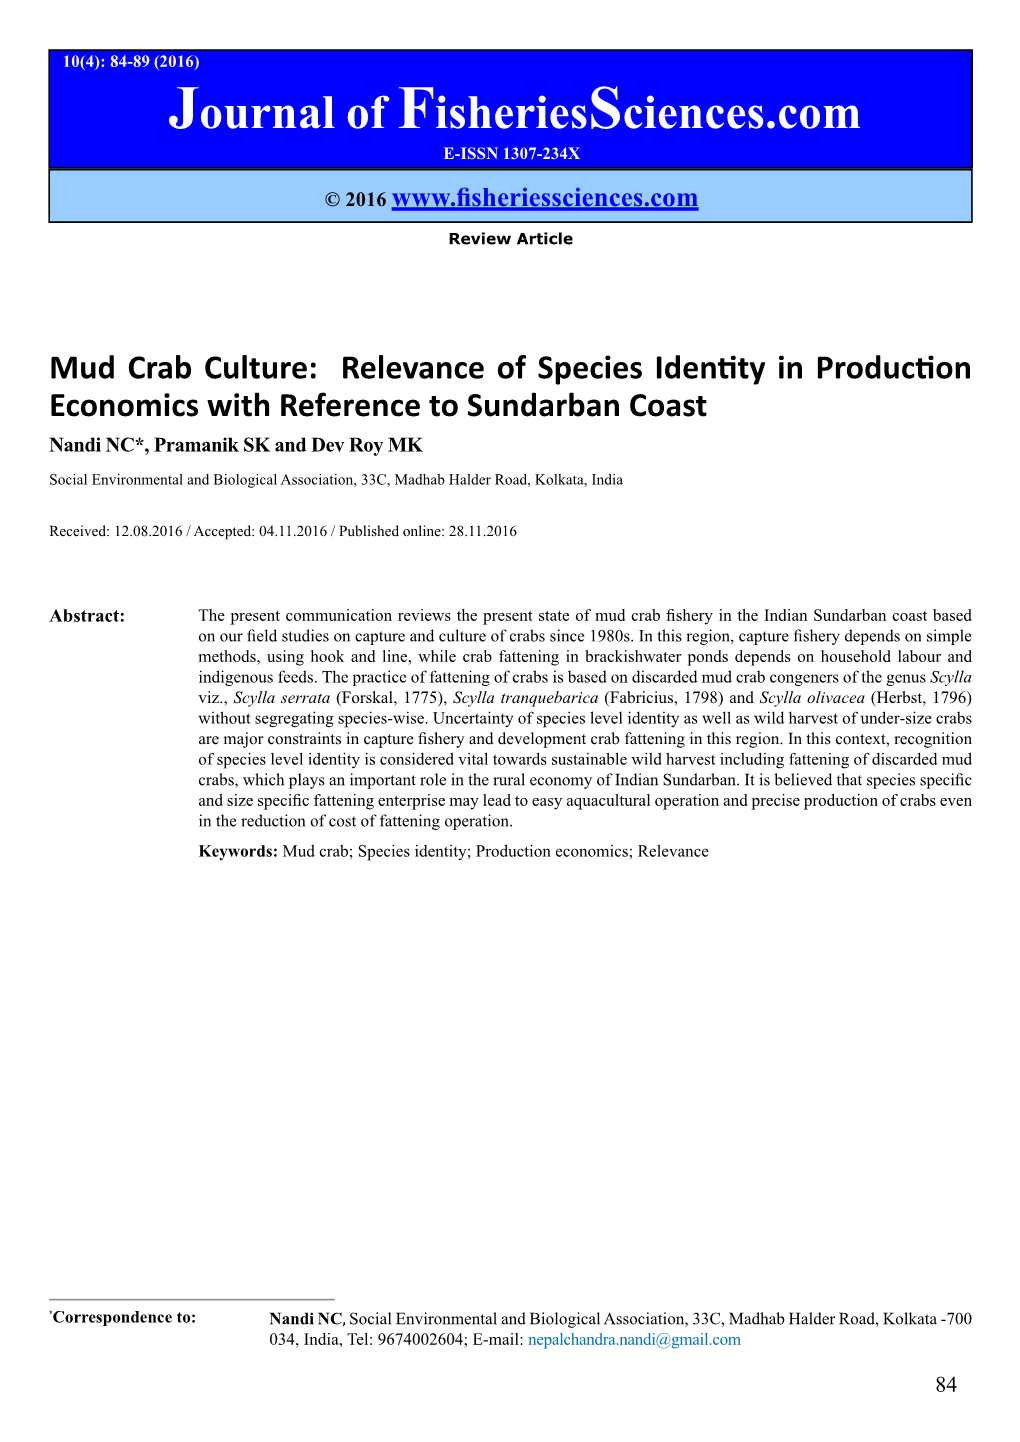 Mud Crab Culture: Relevance of Species Identity in Production Economics with Reference to Sundarban Coast Nandi NC*, Pramanik SK and Dev Roy MK